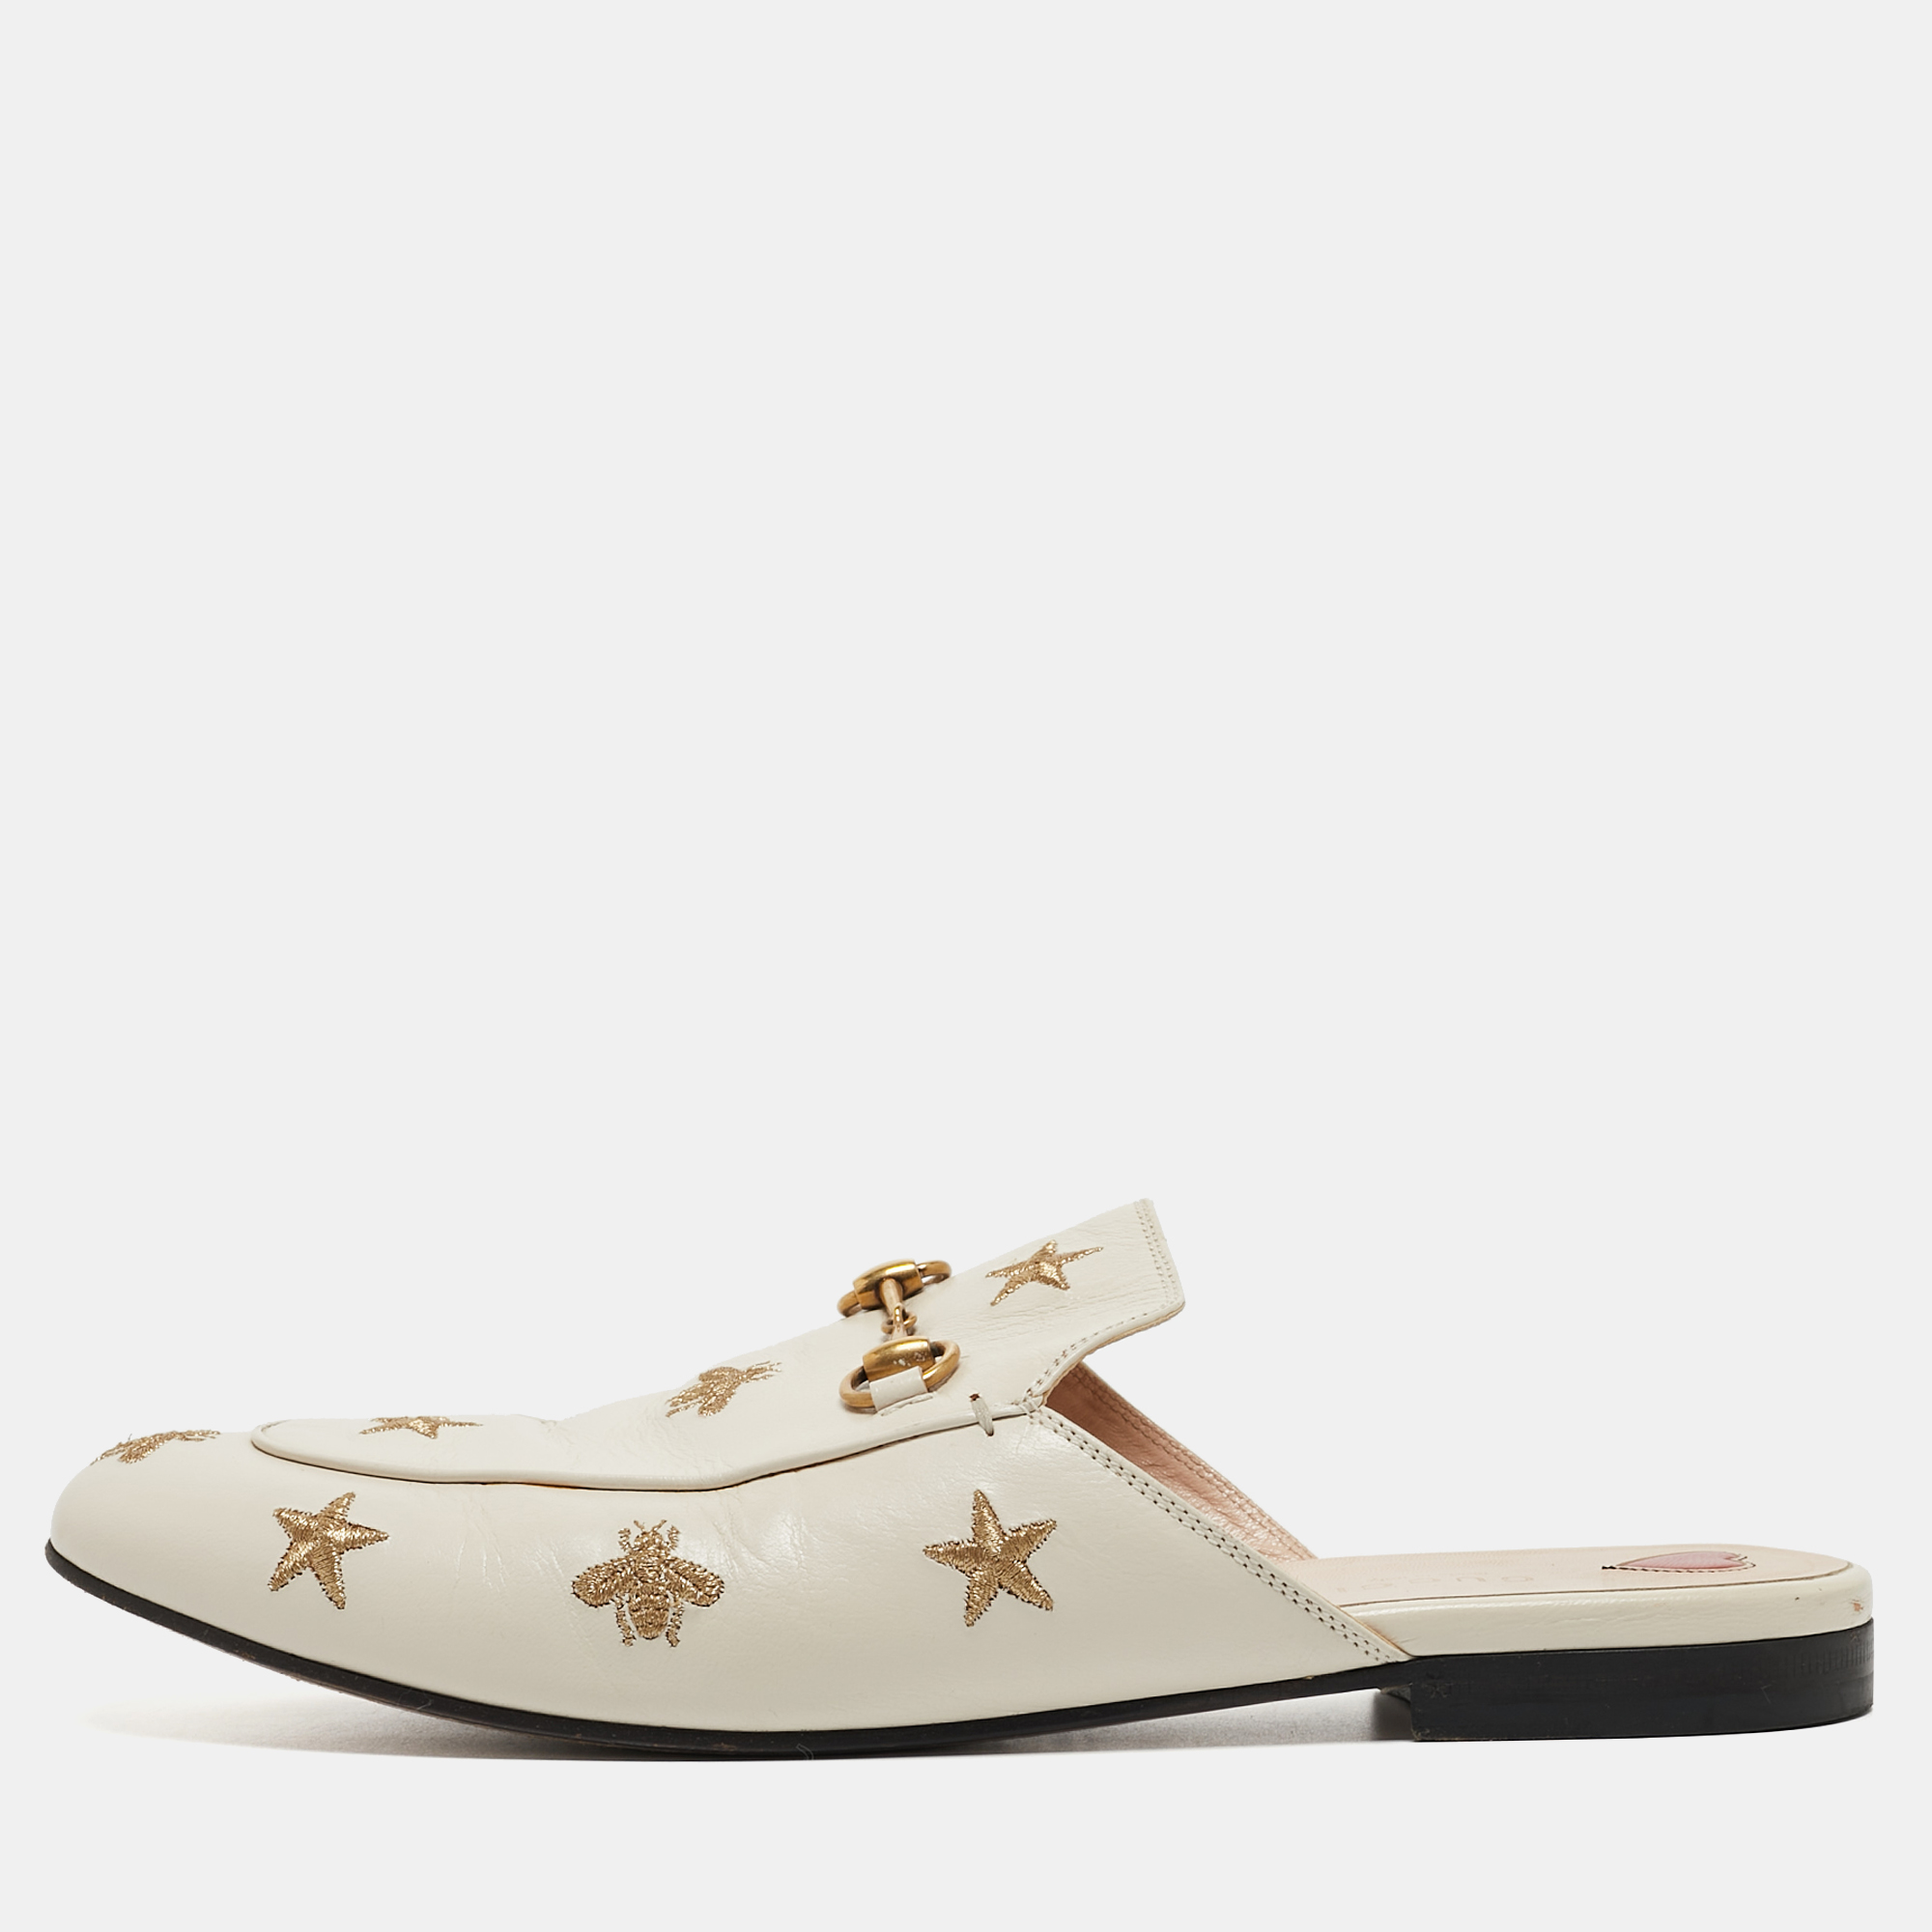 Pre-owned Gucci Cream Leather Bee And Star Embroidered Princetown Flat Mules Size 41.5